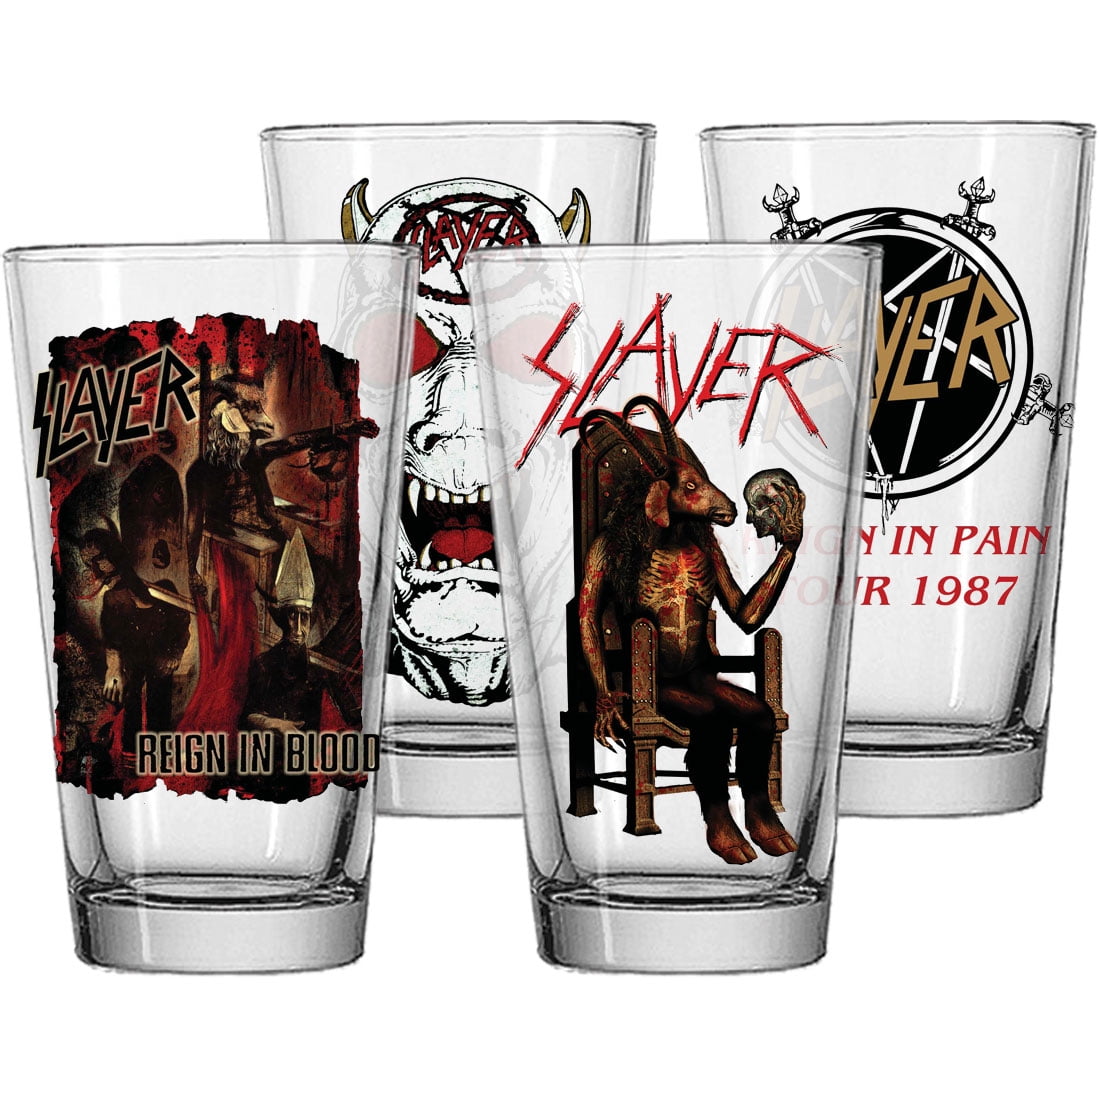 SLAYER REIGN IN BLOOD boxed beer glass New 